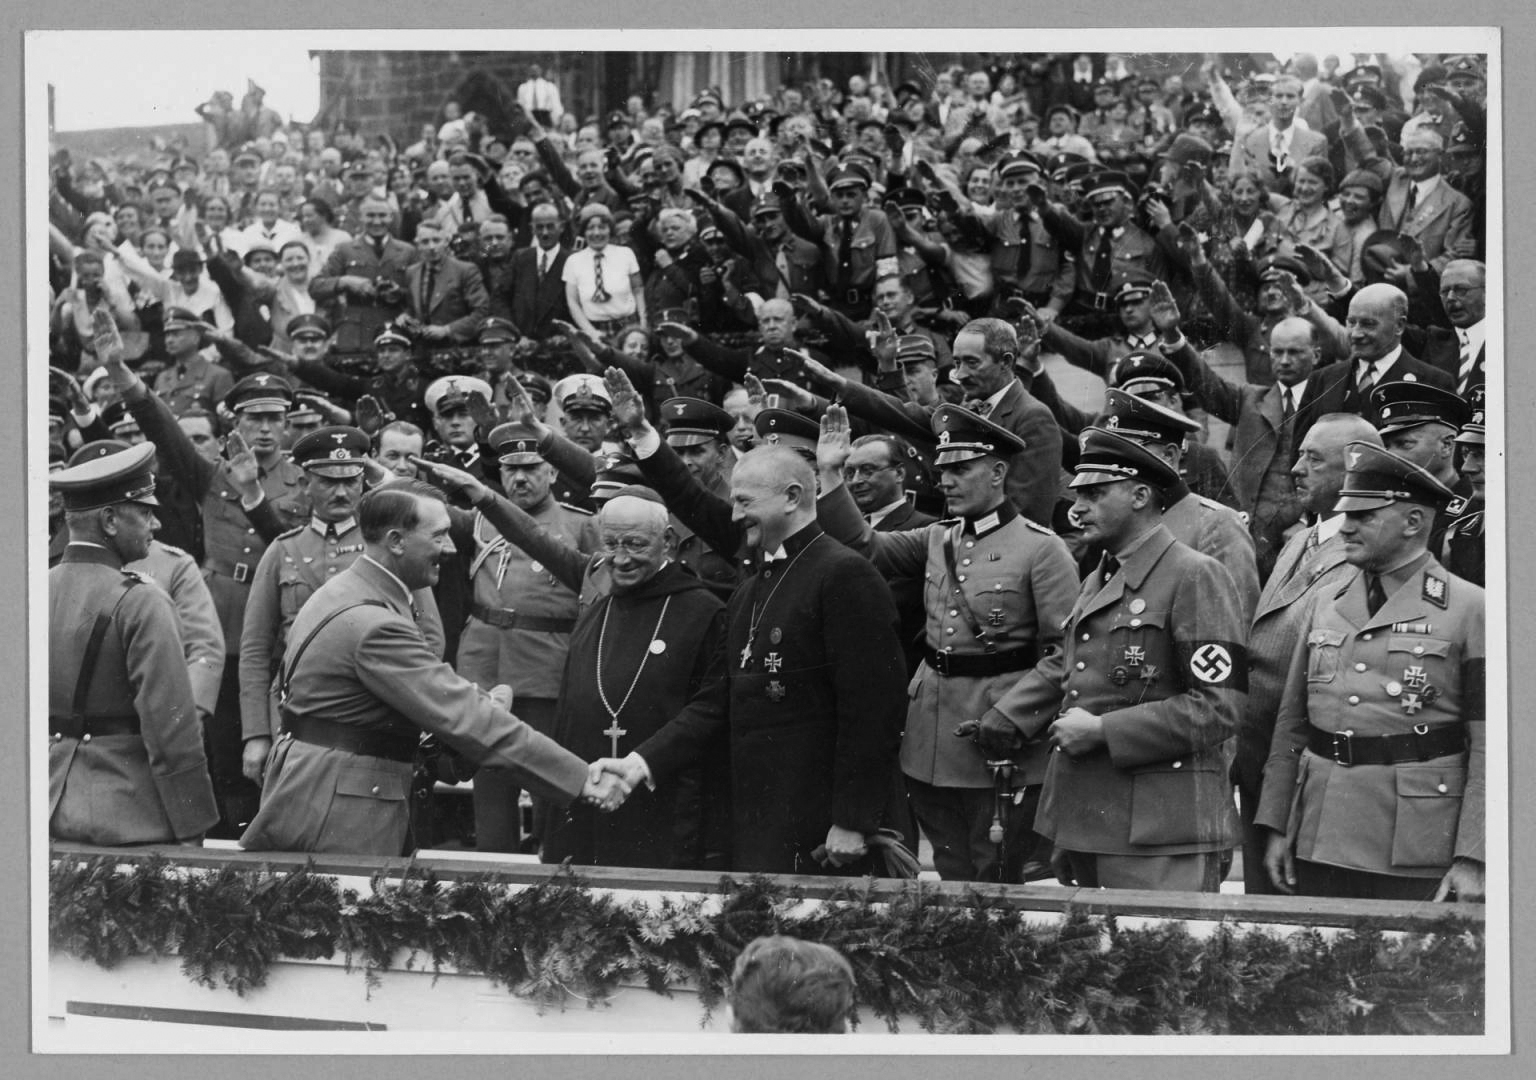 Hitler greets Reich Bishop Ludwig Muller and Abbott Albanus Schachleitner as Honorary guests at the Reich party rally for Unity and Strength